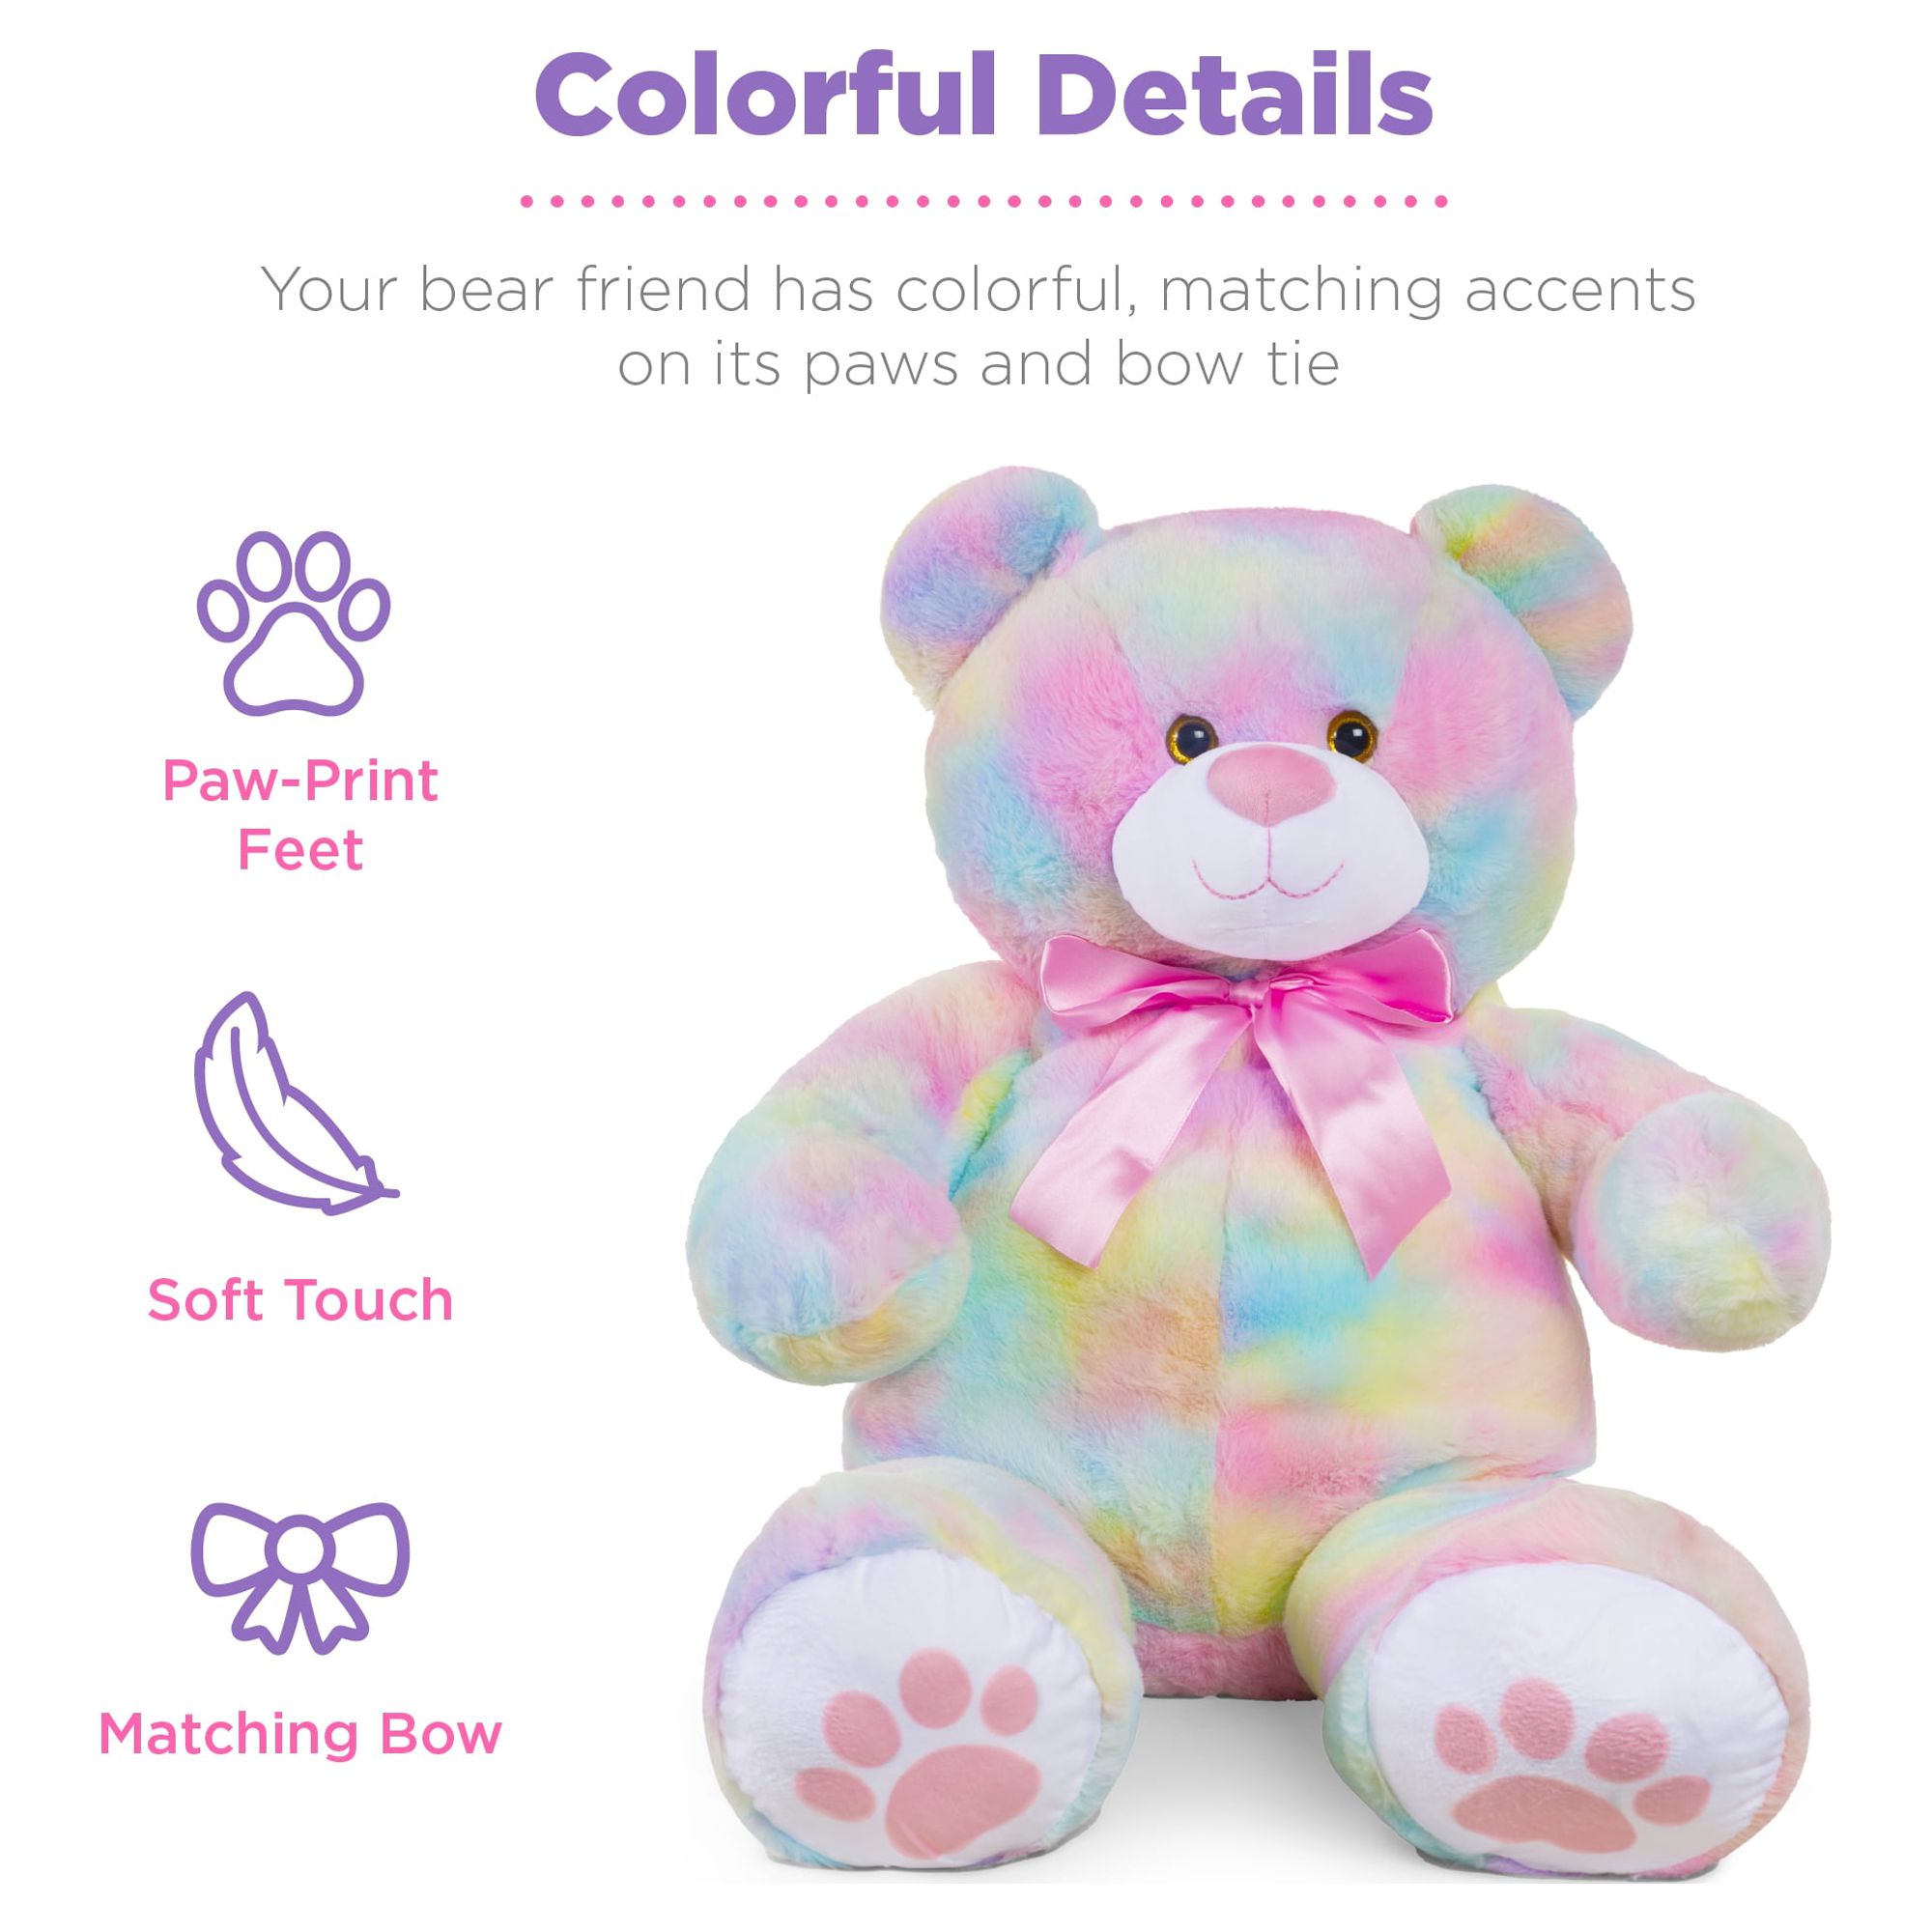 Best Choice Products 35in Giant Soft Plush Teddy Bear Stuffed Animal Toy w/ Bow Tie, Footprints - Pastel - image 5 of 8